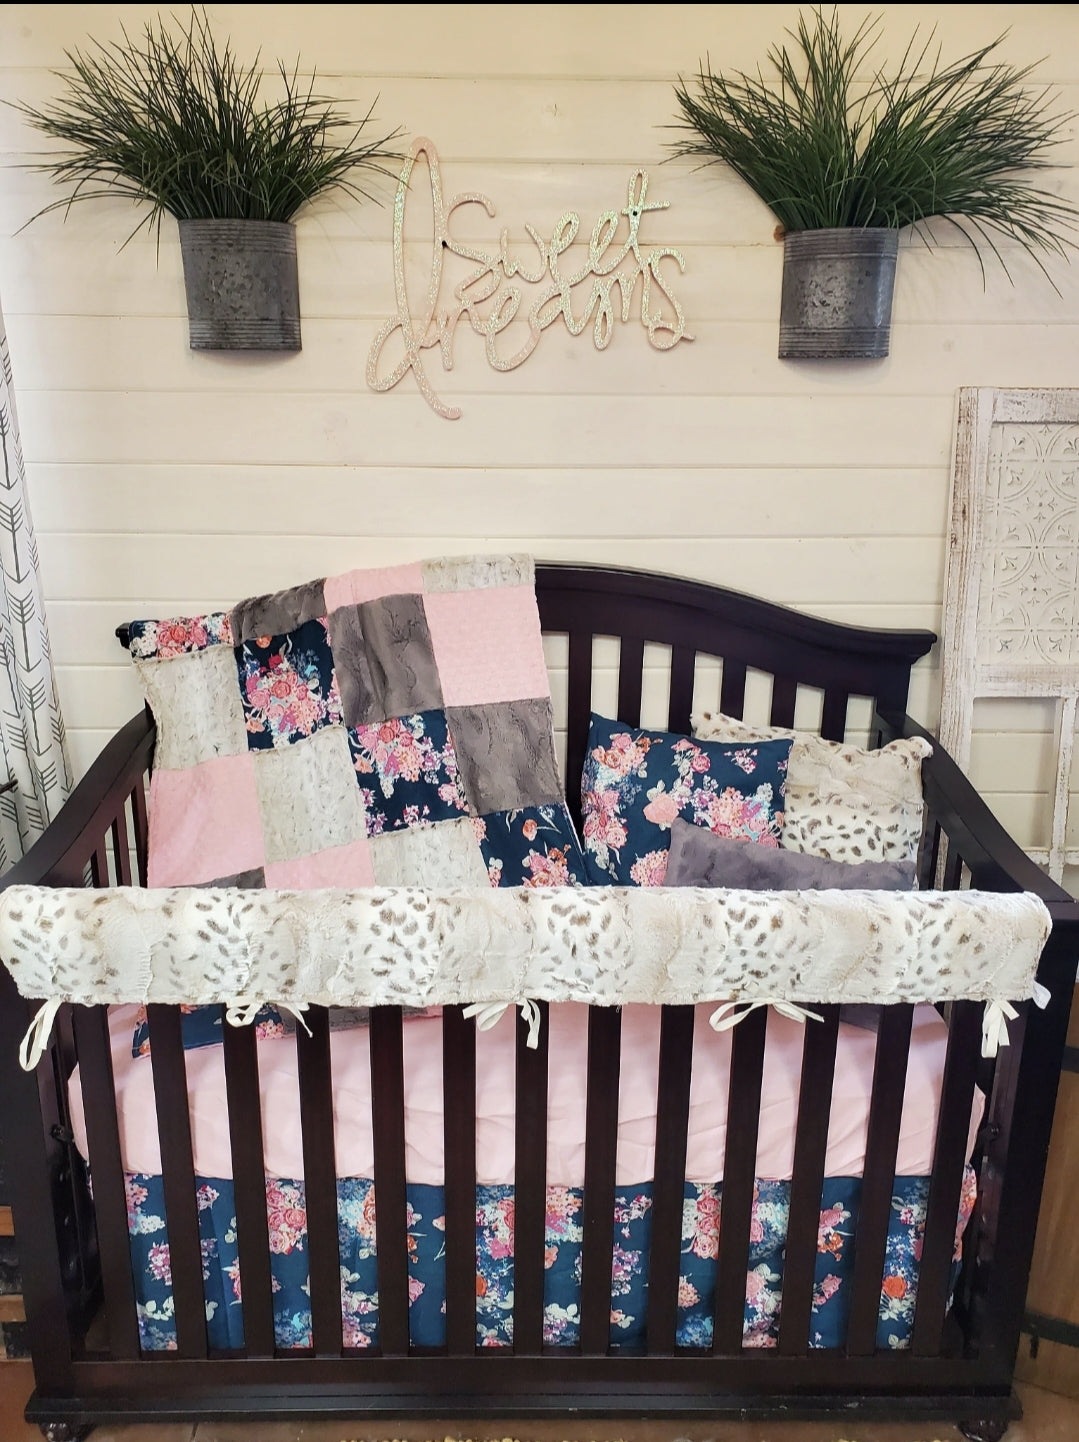 New Release Girl Crib Bedding- Navy Floral and Lynx Minky Baby Bedding Collection - DBC Baby Bedding Co 